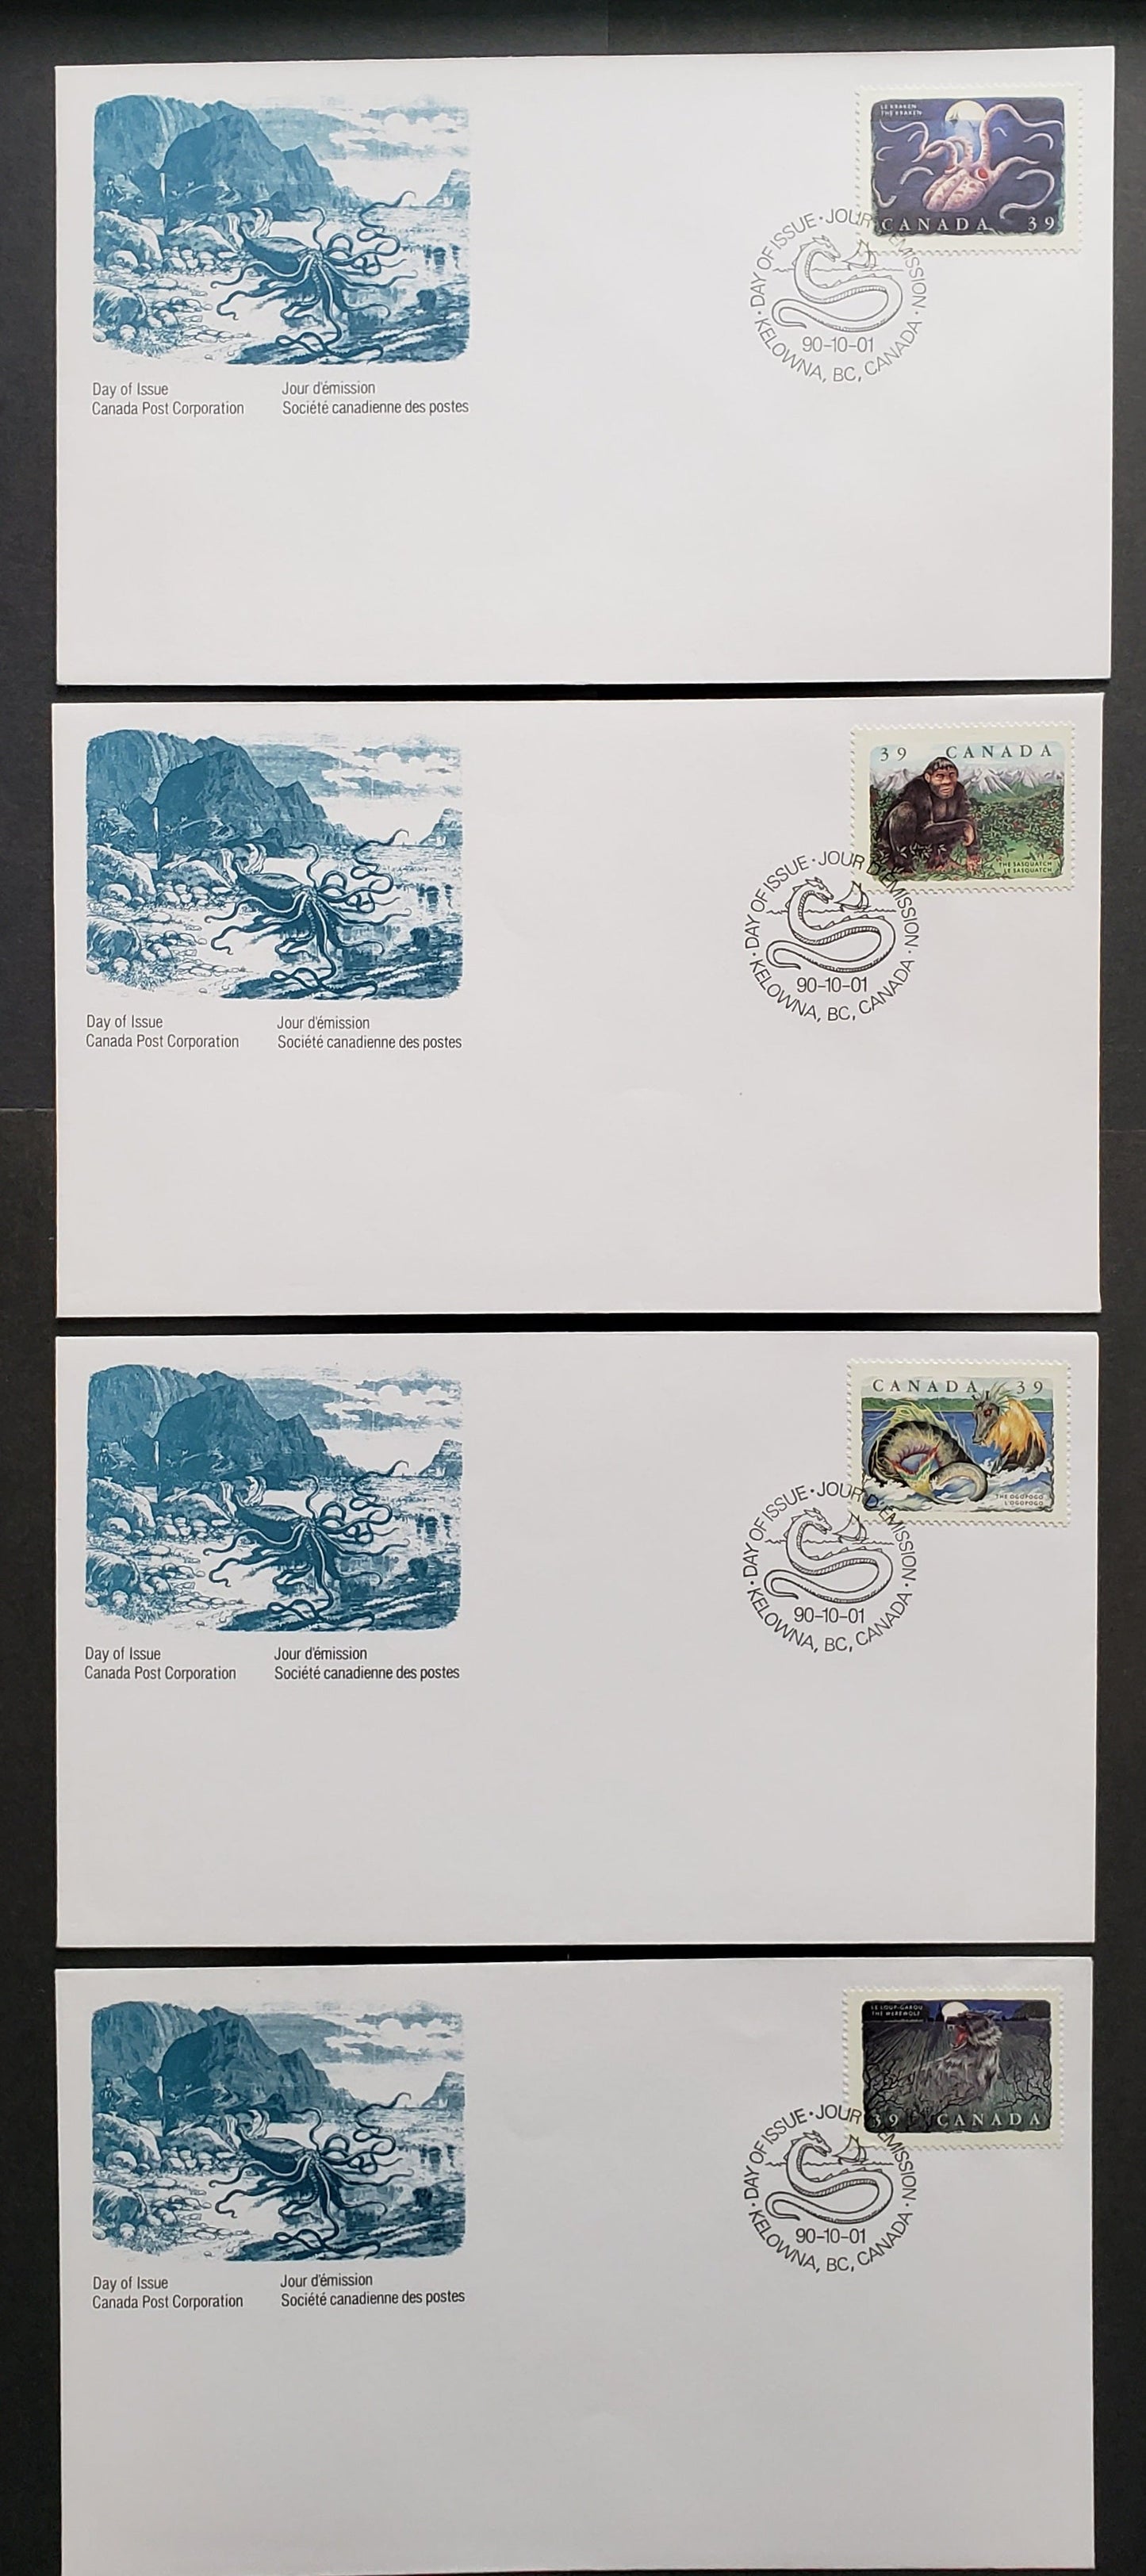 Lot 90 Canada #1289a-1292c 39c Multicolor 1990 Folklore Issue, 4 Canada Post FDC's Franked With Singles, With Scarcer Perf 12.5 X 12, This Is The Only Perf That The FDC'S With Singles Came In, Quantity Issued Unknown, Cat. Value $20